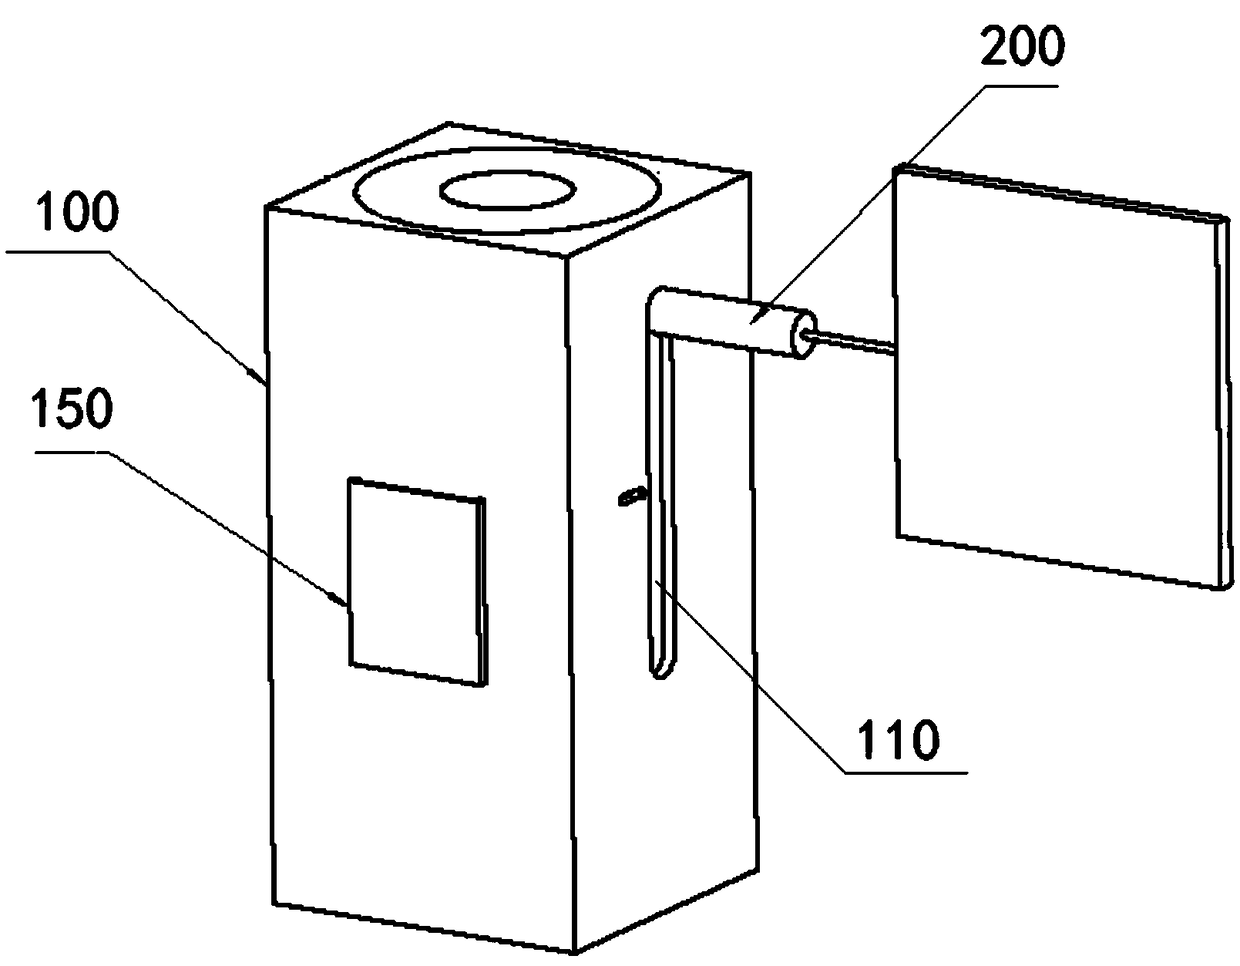 Bearing storage observing device